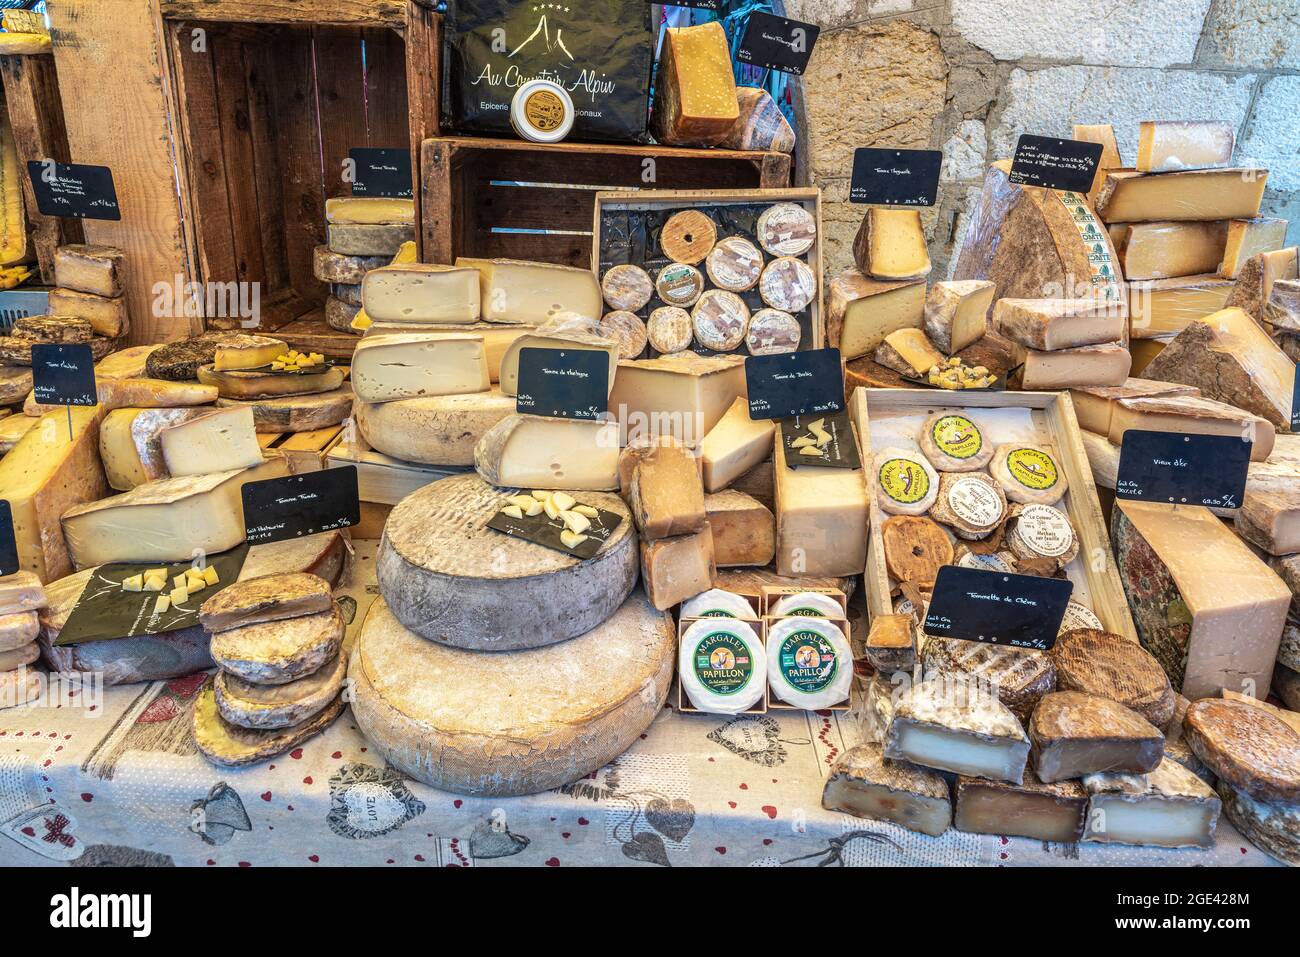 Typical products for sale on the stalls at the Annecy traditional market. Annecy, Savoie department, Auvergne-Rhône-Alpes region, France, Europe Stock Photo